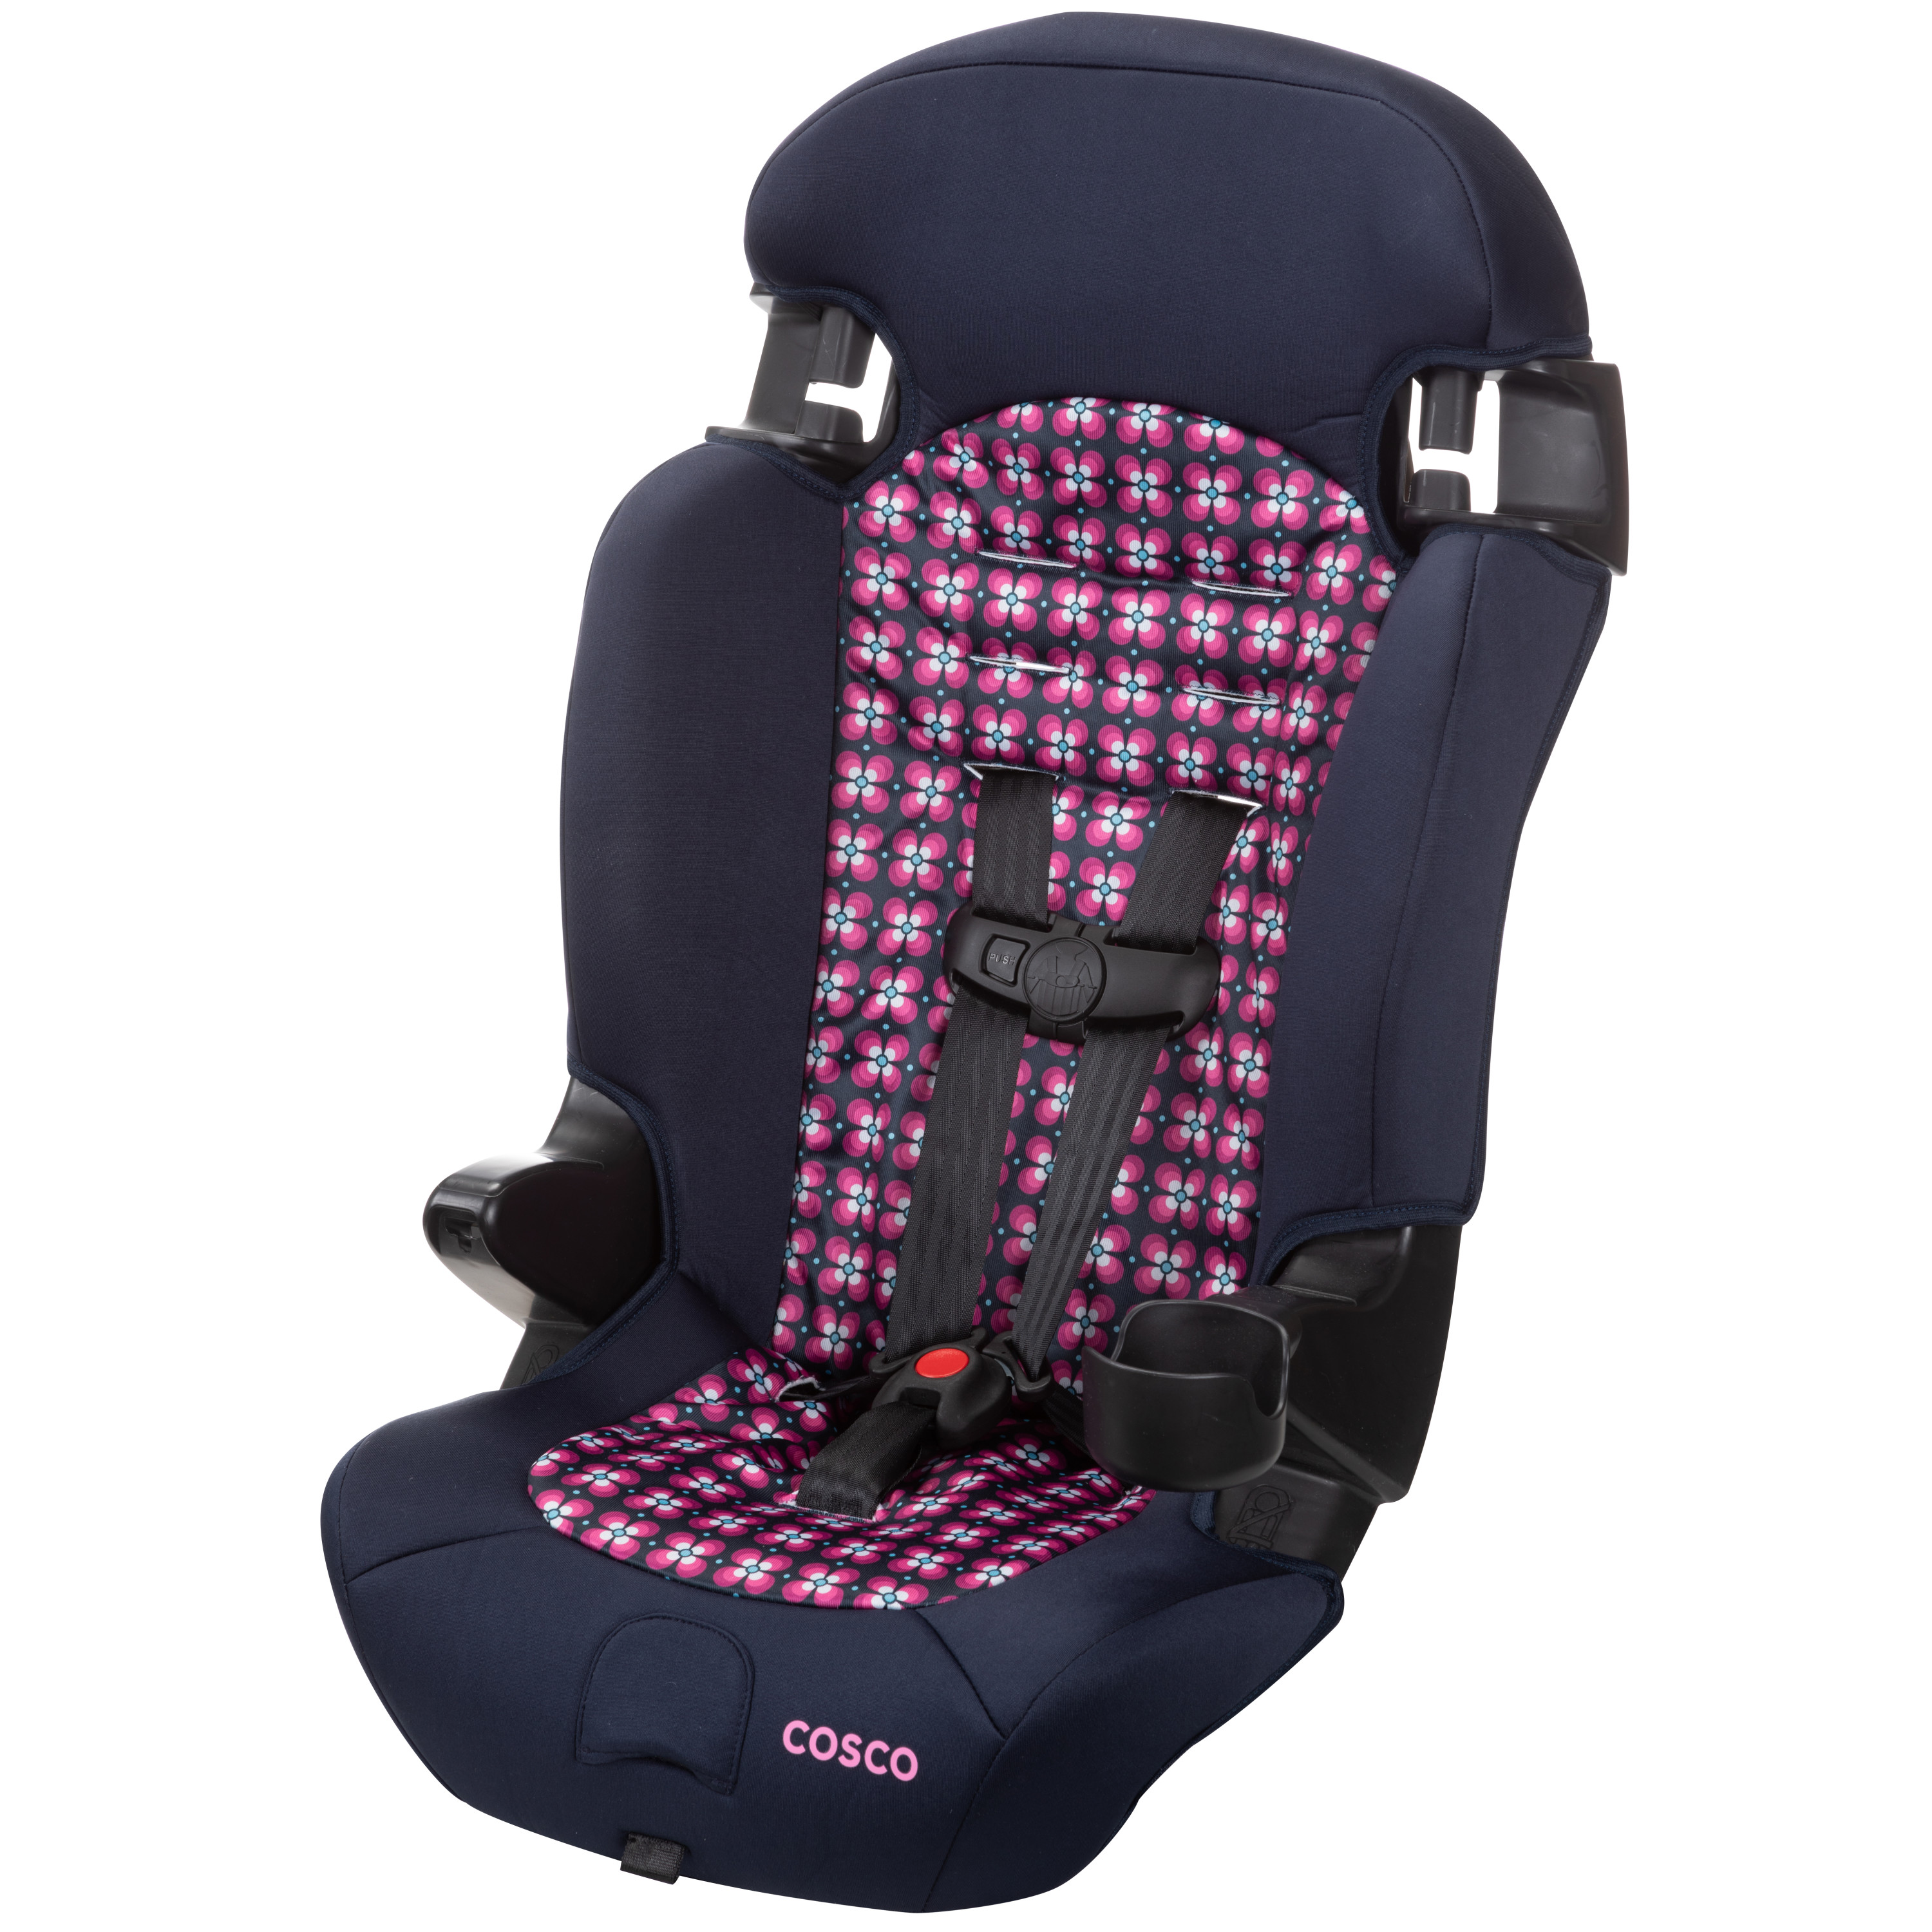 Cosco Kids Finale 2-in-1 Booster Car Seat, Peony Tiles - image 1 of 16